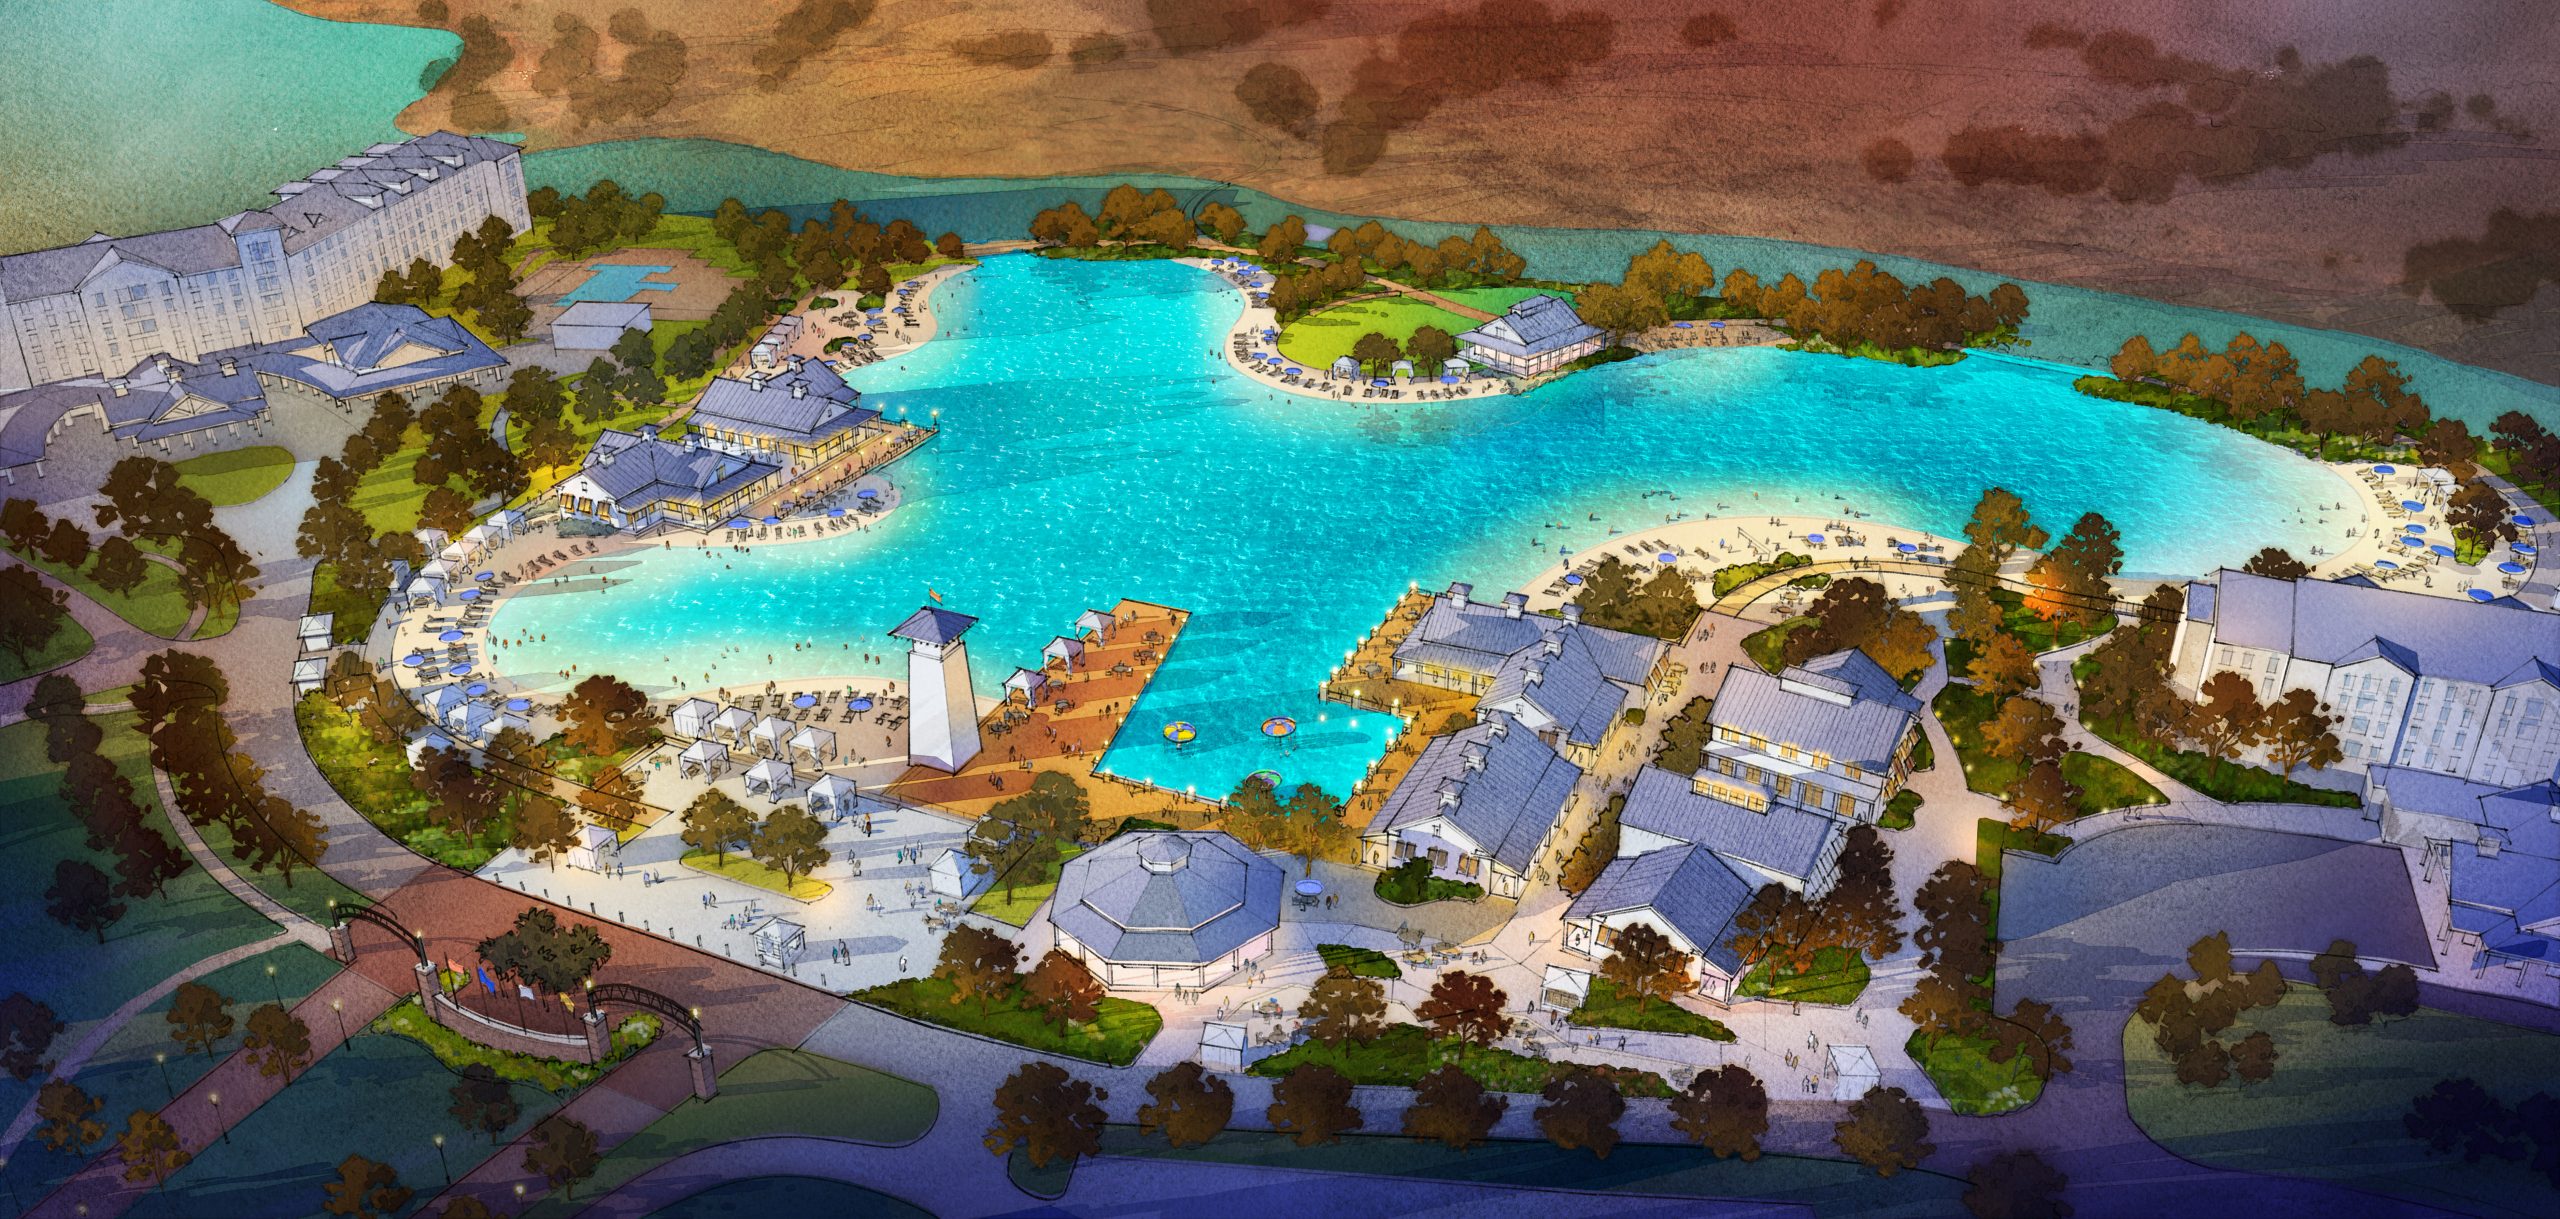 Memphis Flyer Water Park, Youth Sports Complex Planned in 140M